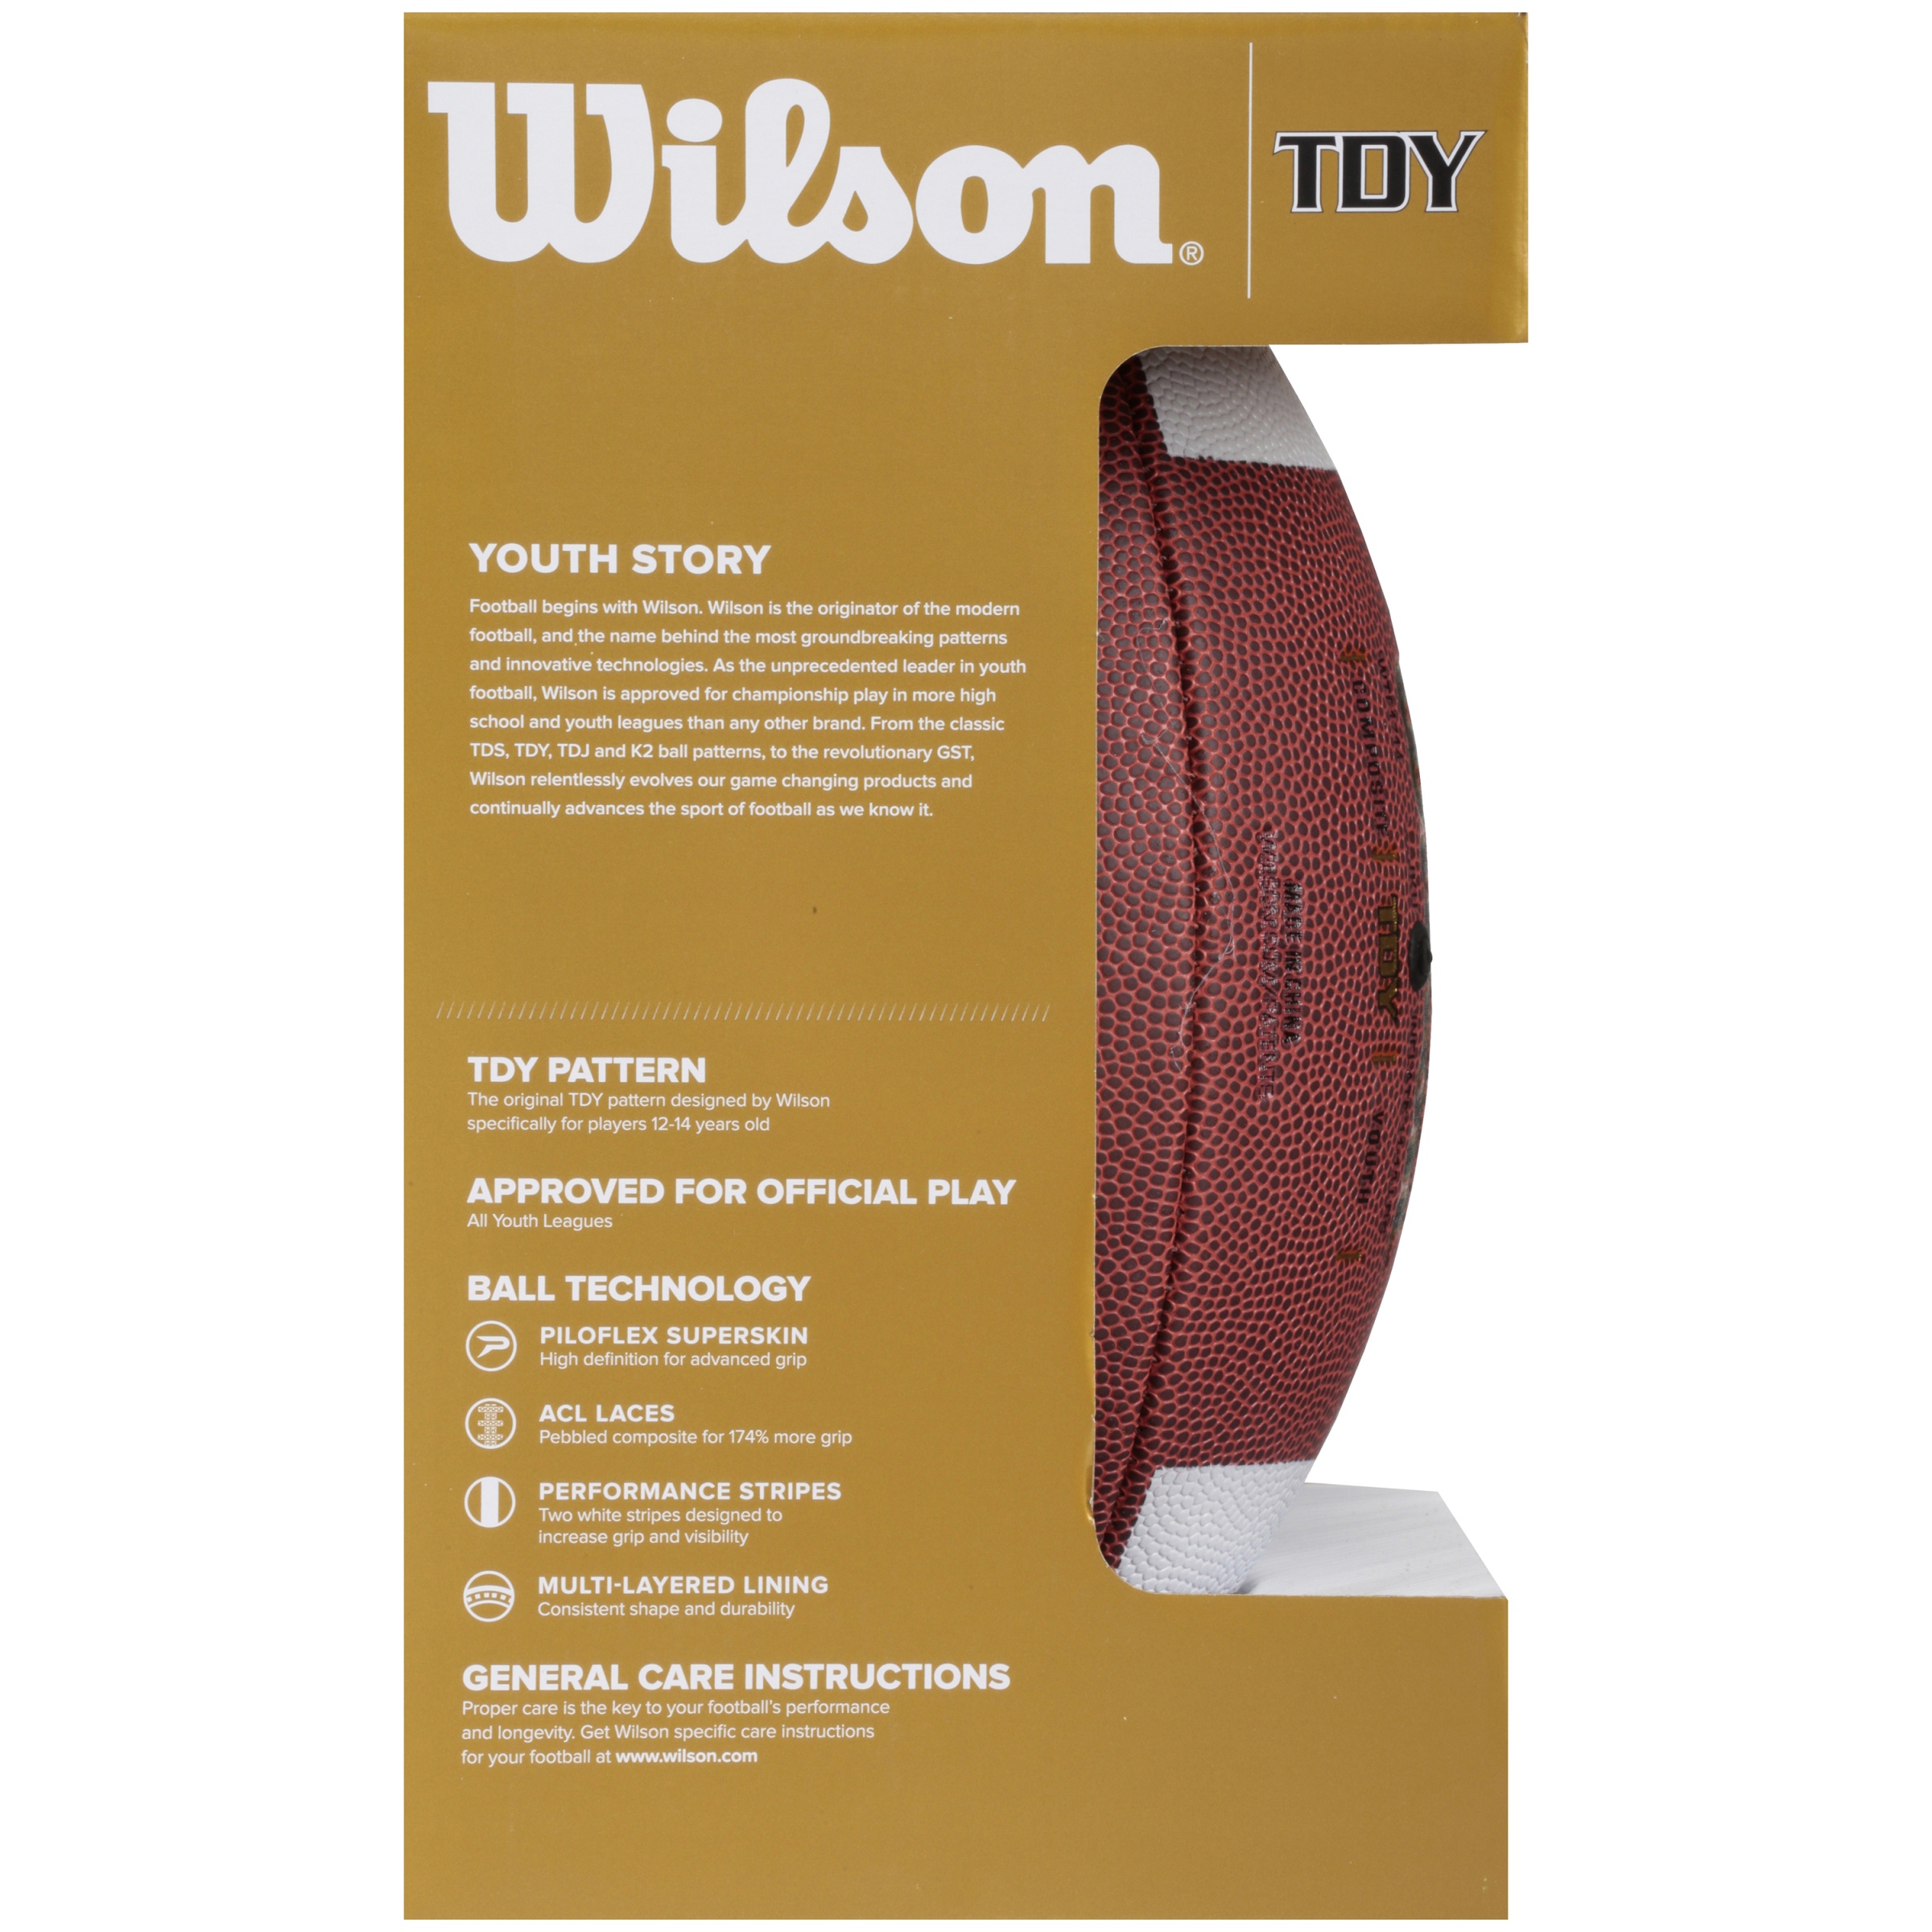 Wilson TDY Composite Football - Youth - image 3 of 5